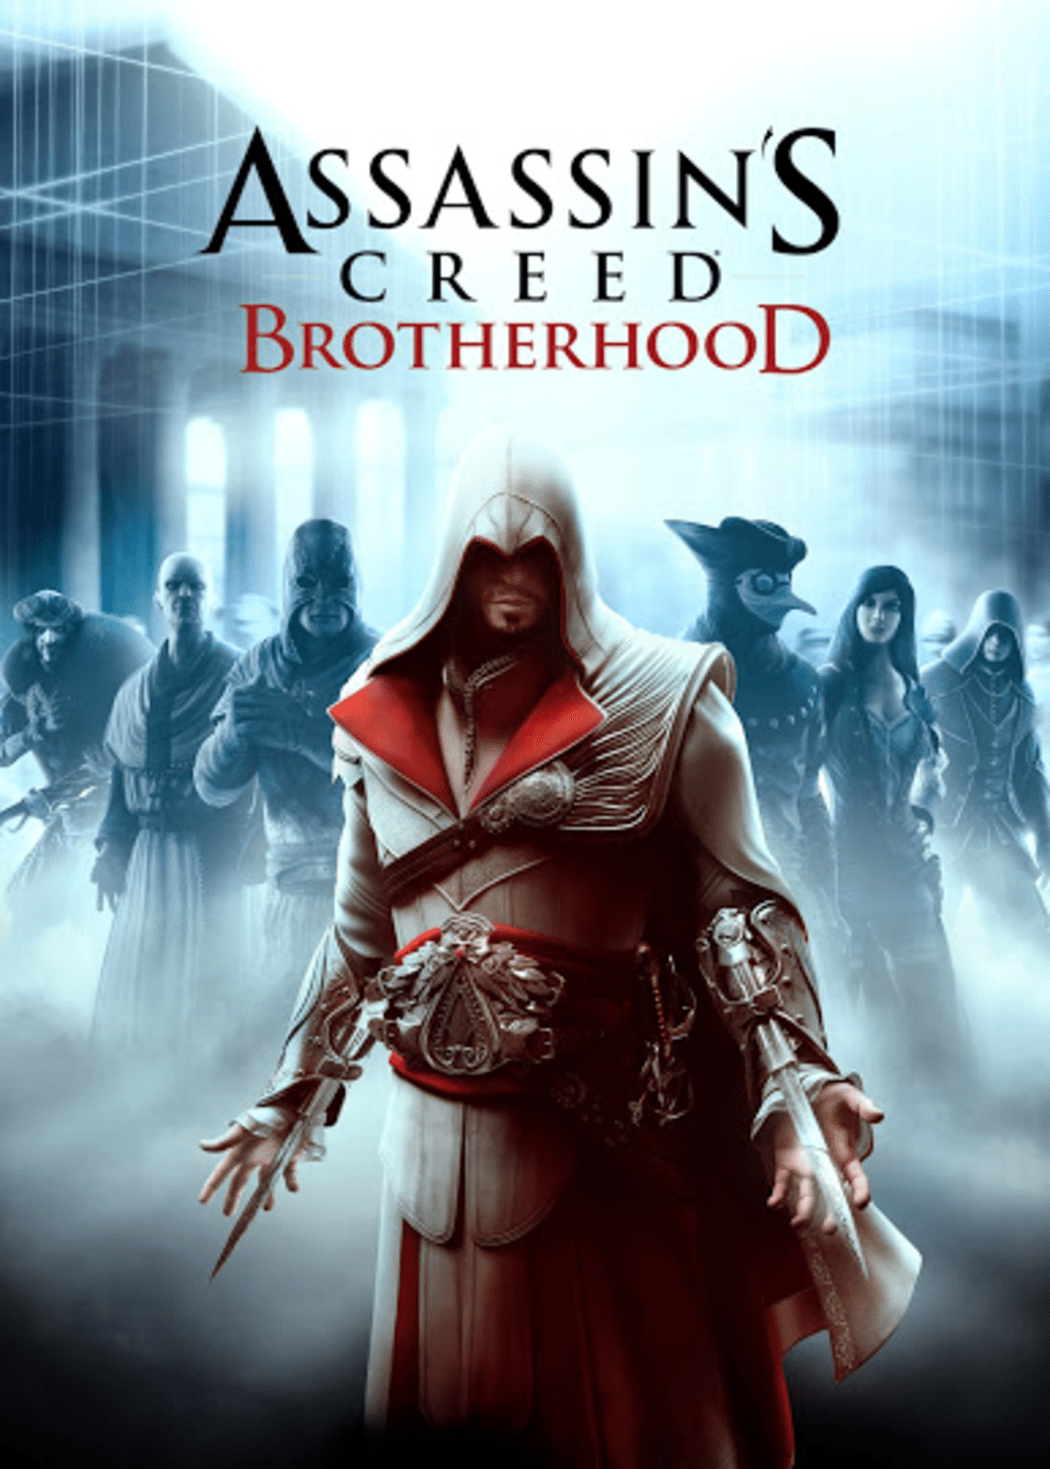 Assassin's Creed 2 Ubisoft Connect CD Key